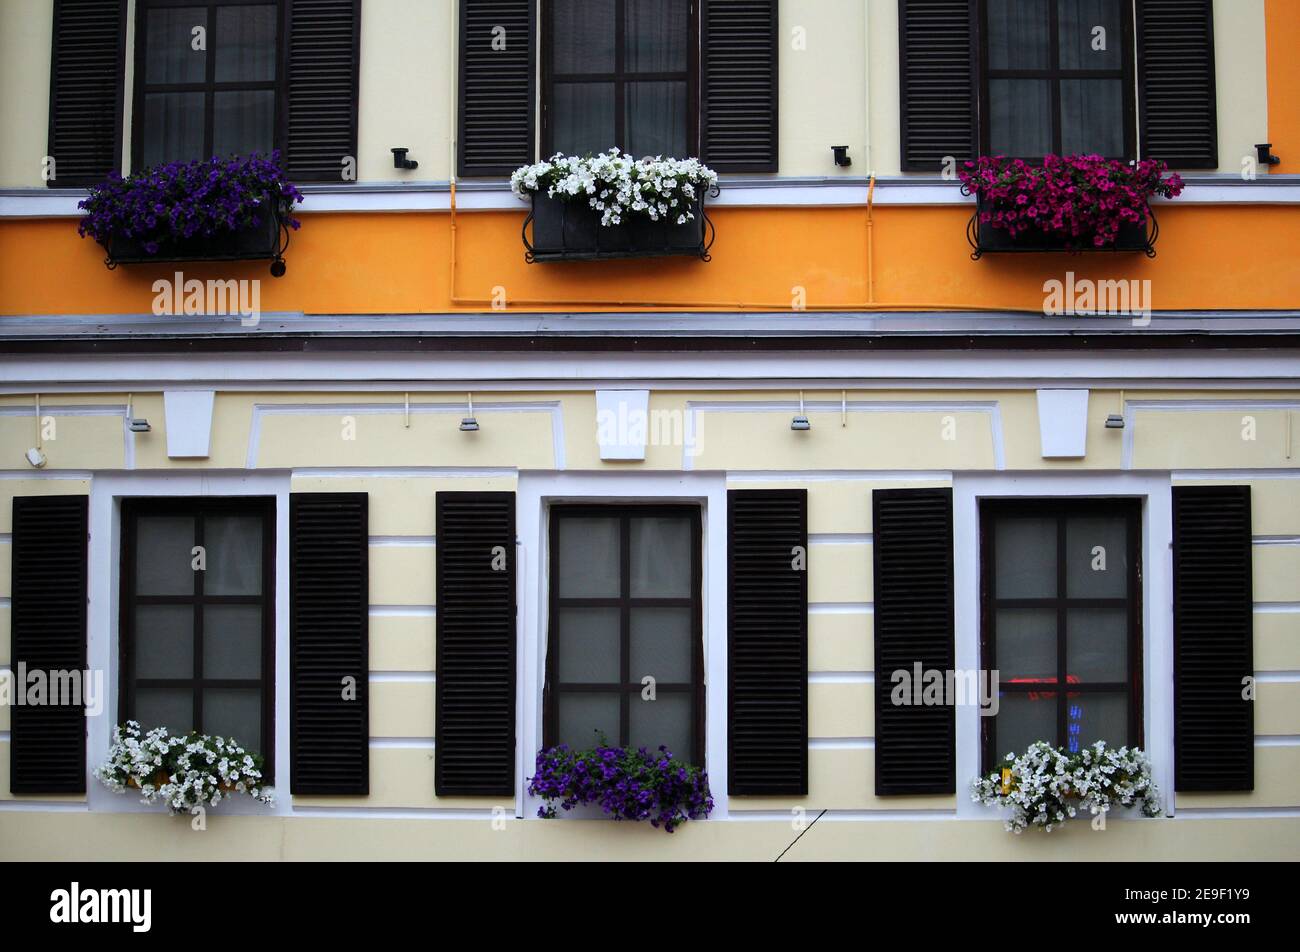 Flowers On A Windows With Open Shutters On Building Facade Stock Photo